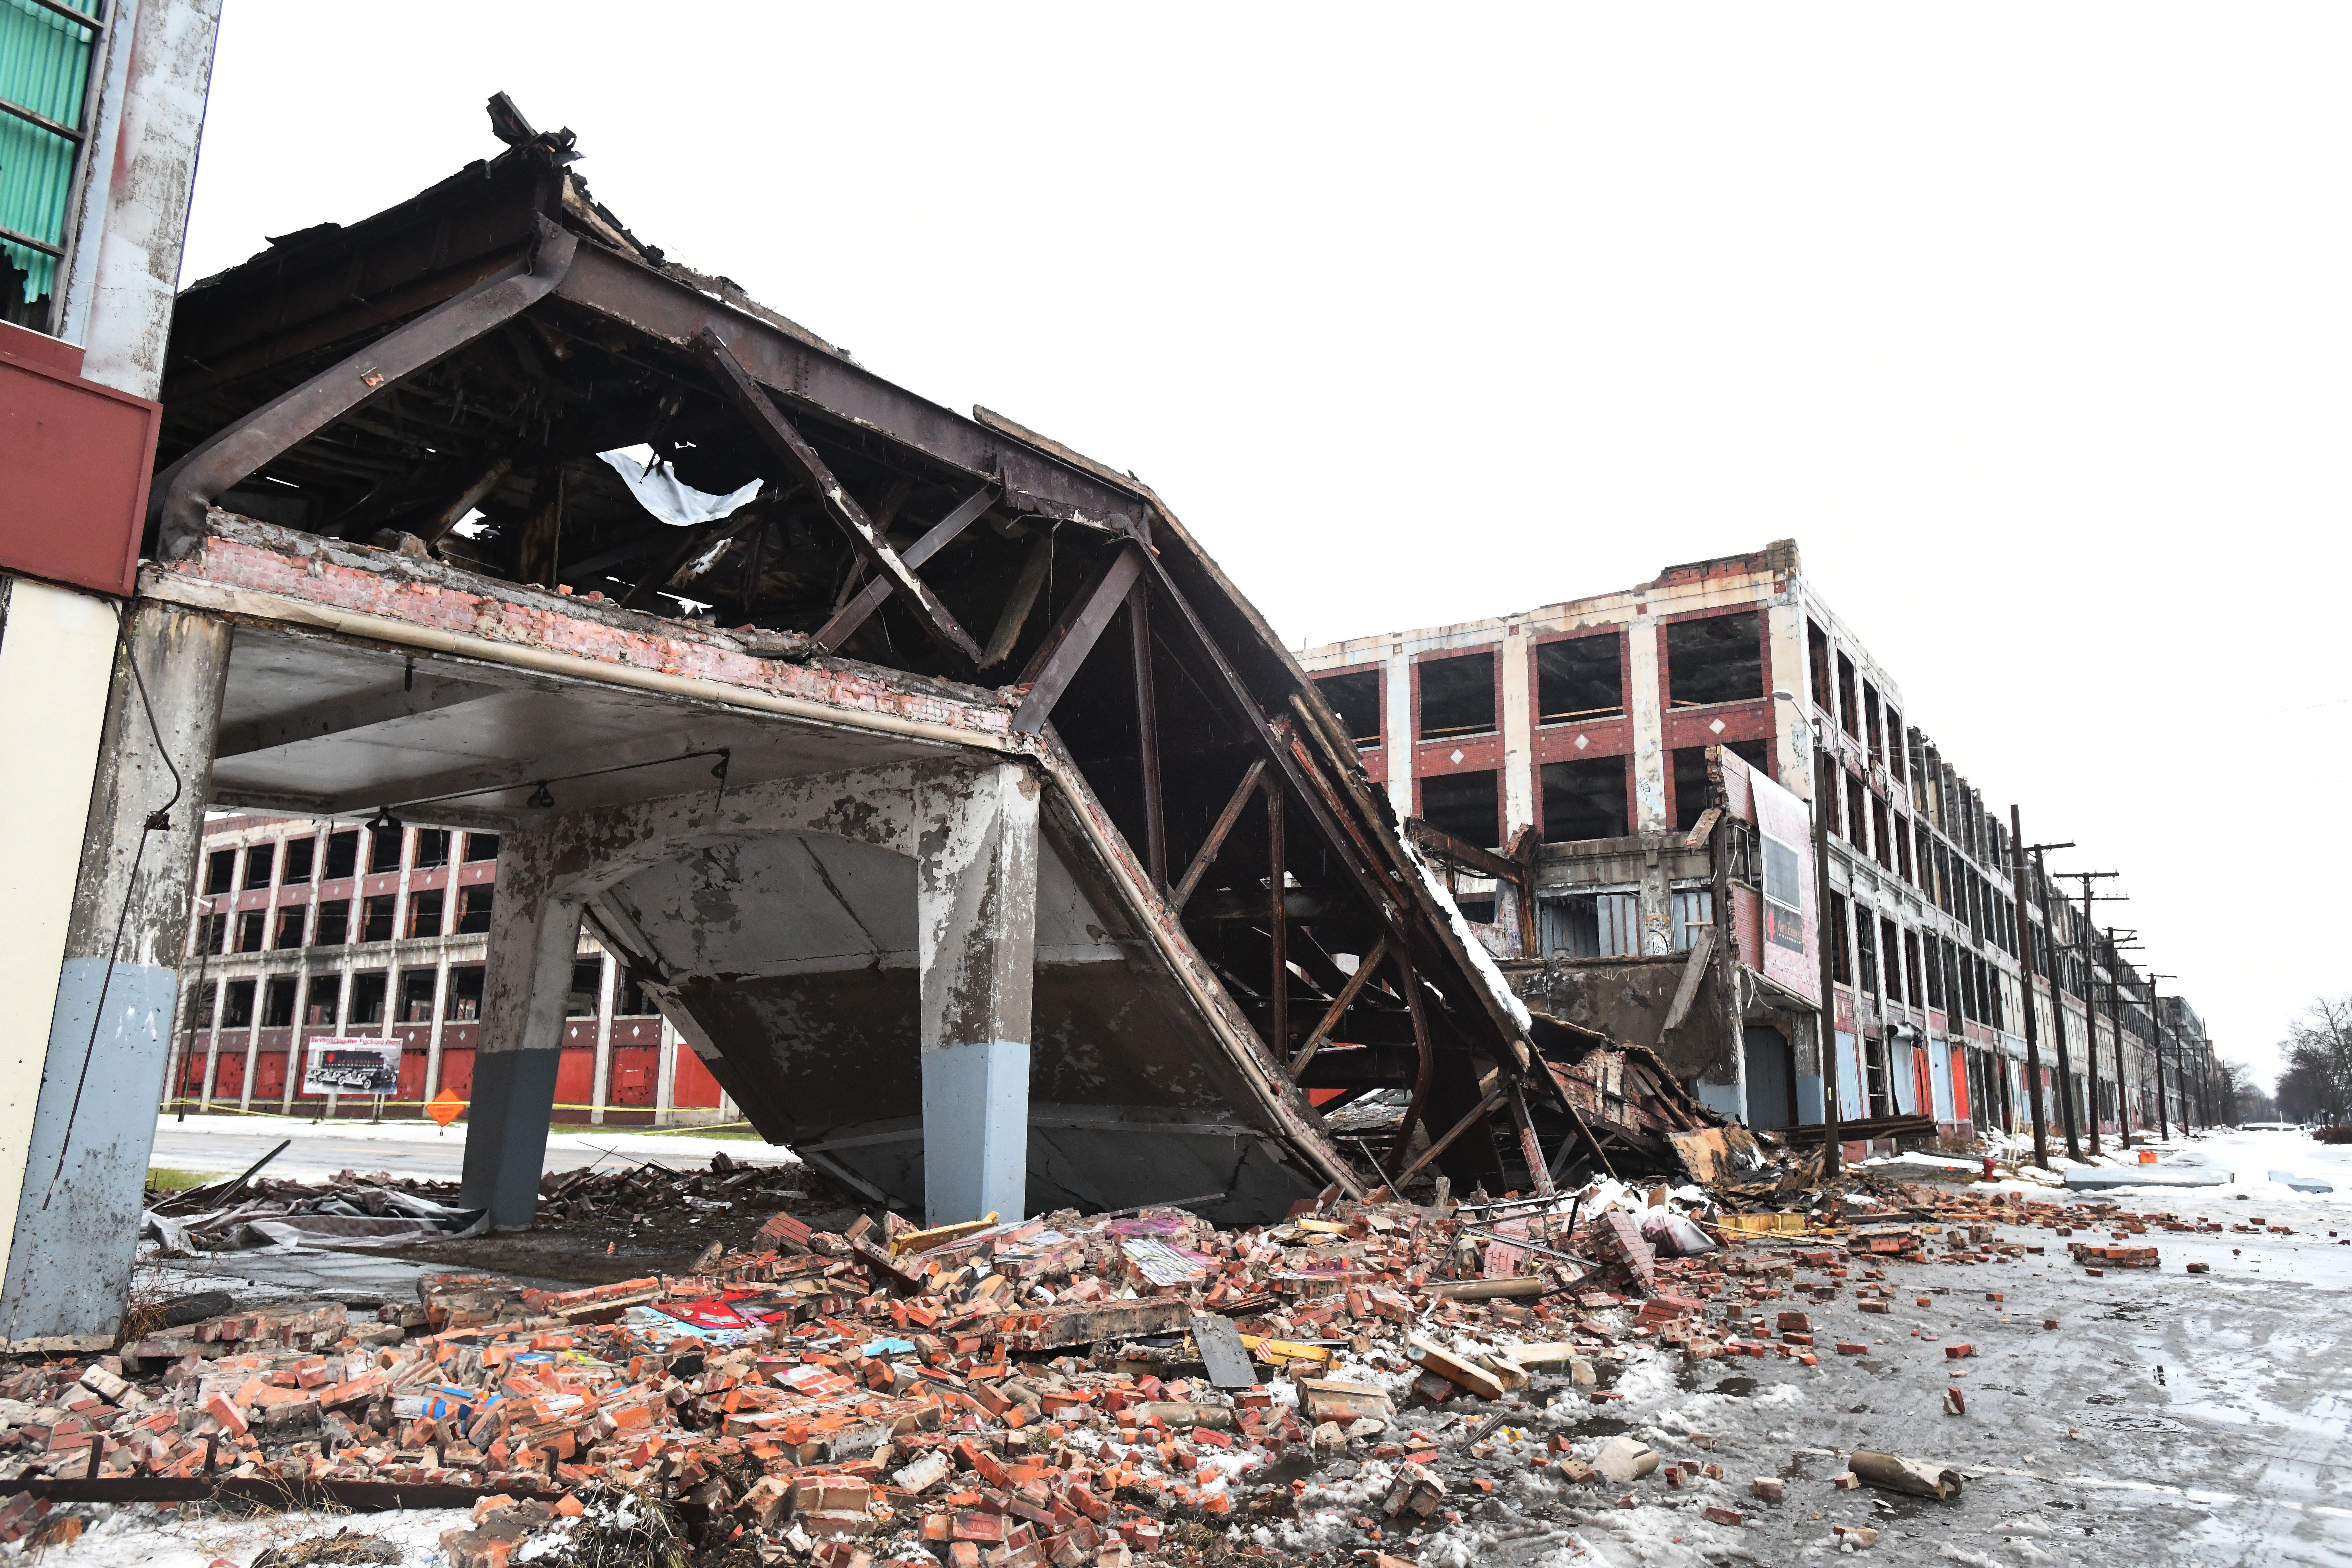 “The best we can determine is that it was a pre-existing structural issue, due to temperature fluctuations that caused the collapse,” Joe Kopietz, a spokesman for Arte Express